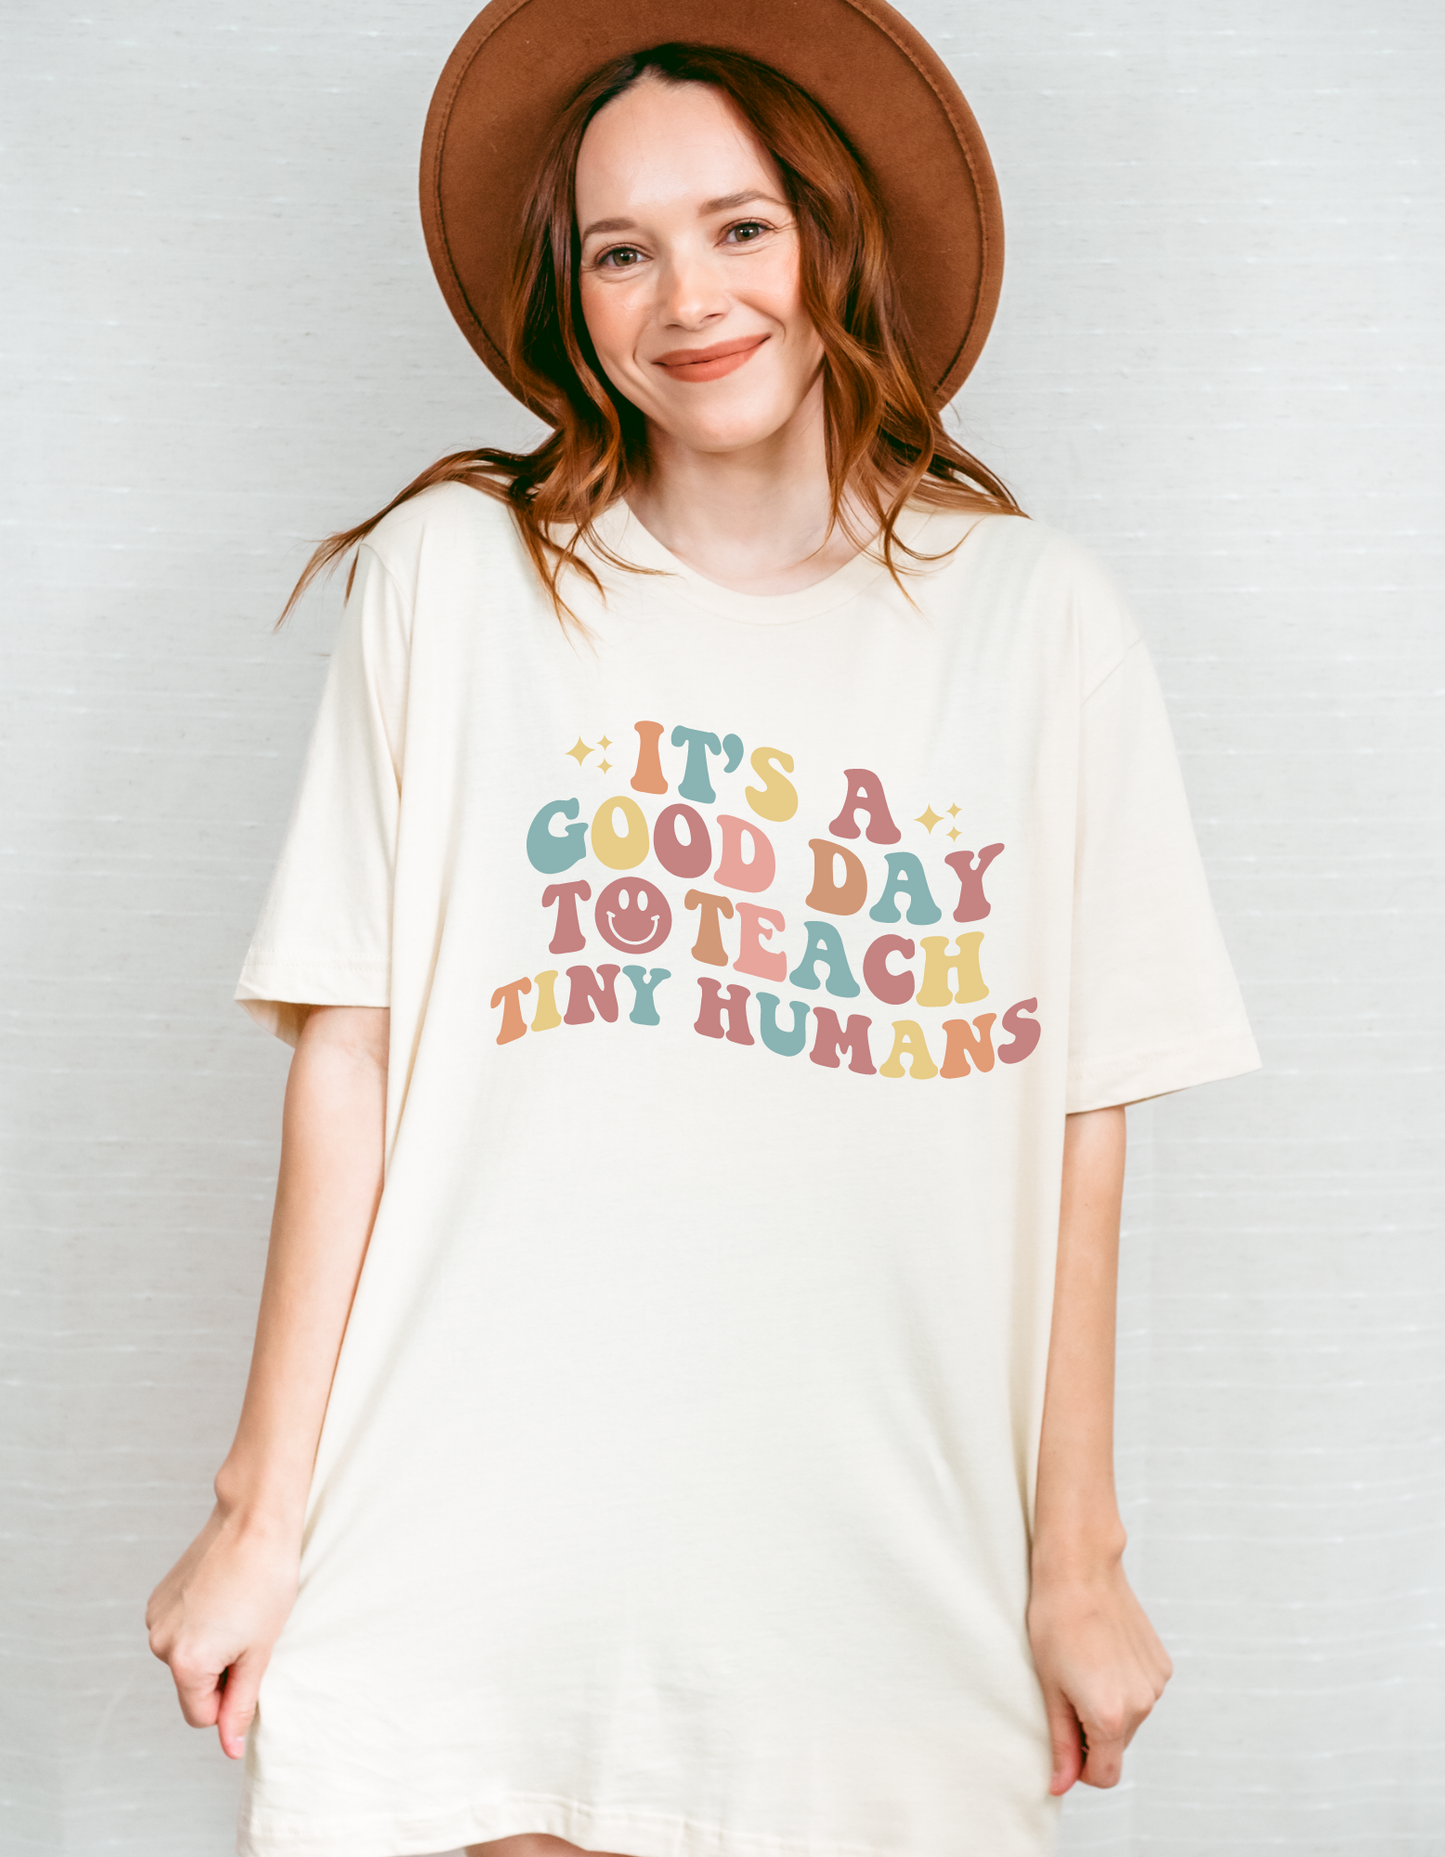 It's a good day to teach tiny humans - Natural t- shirt